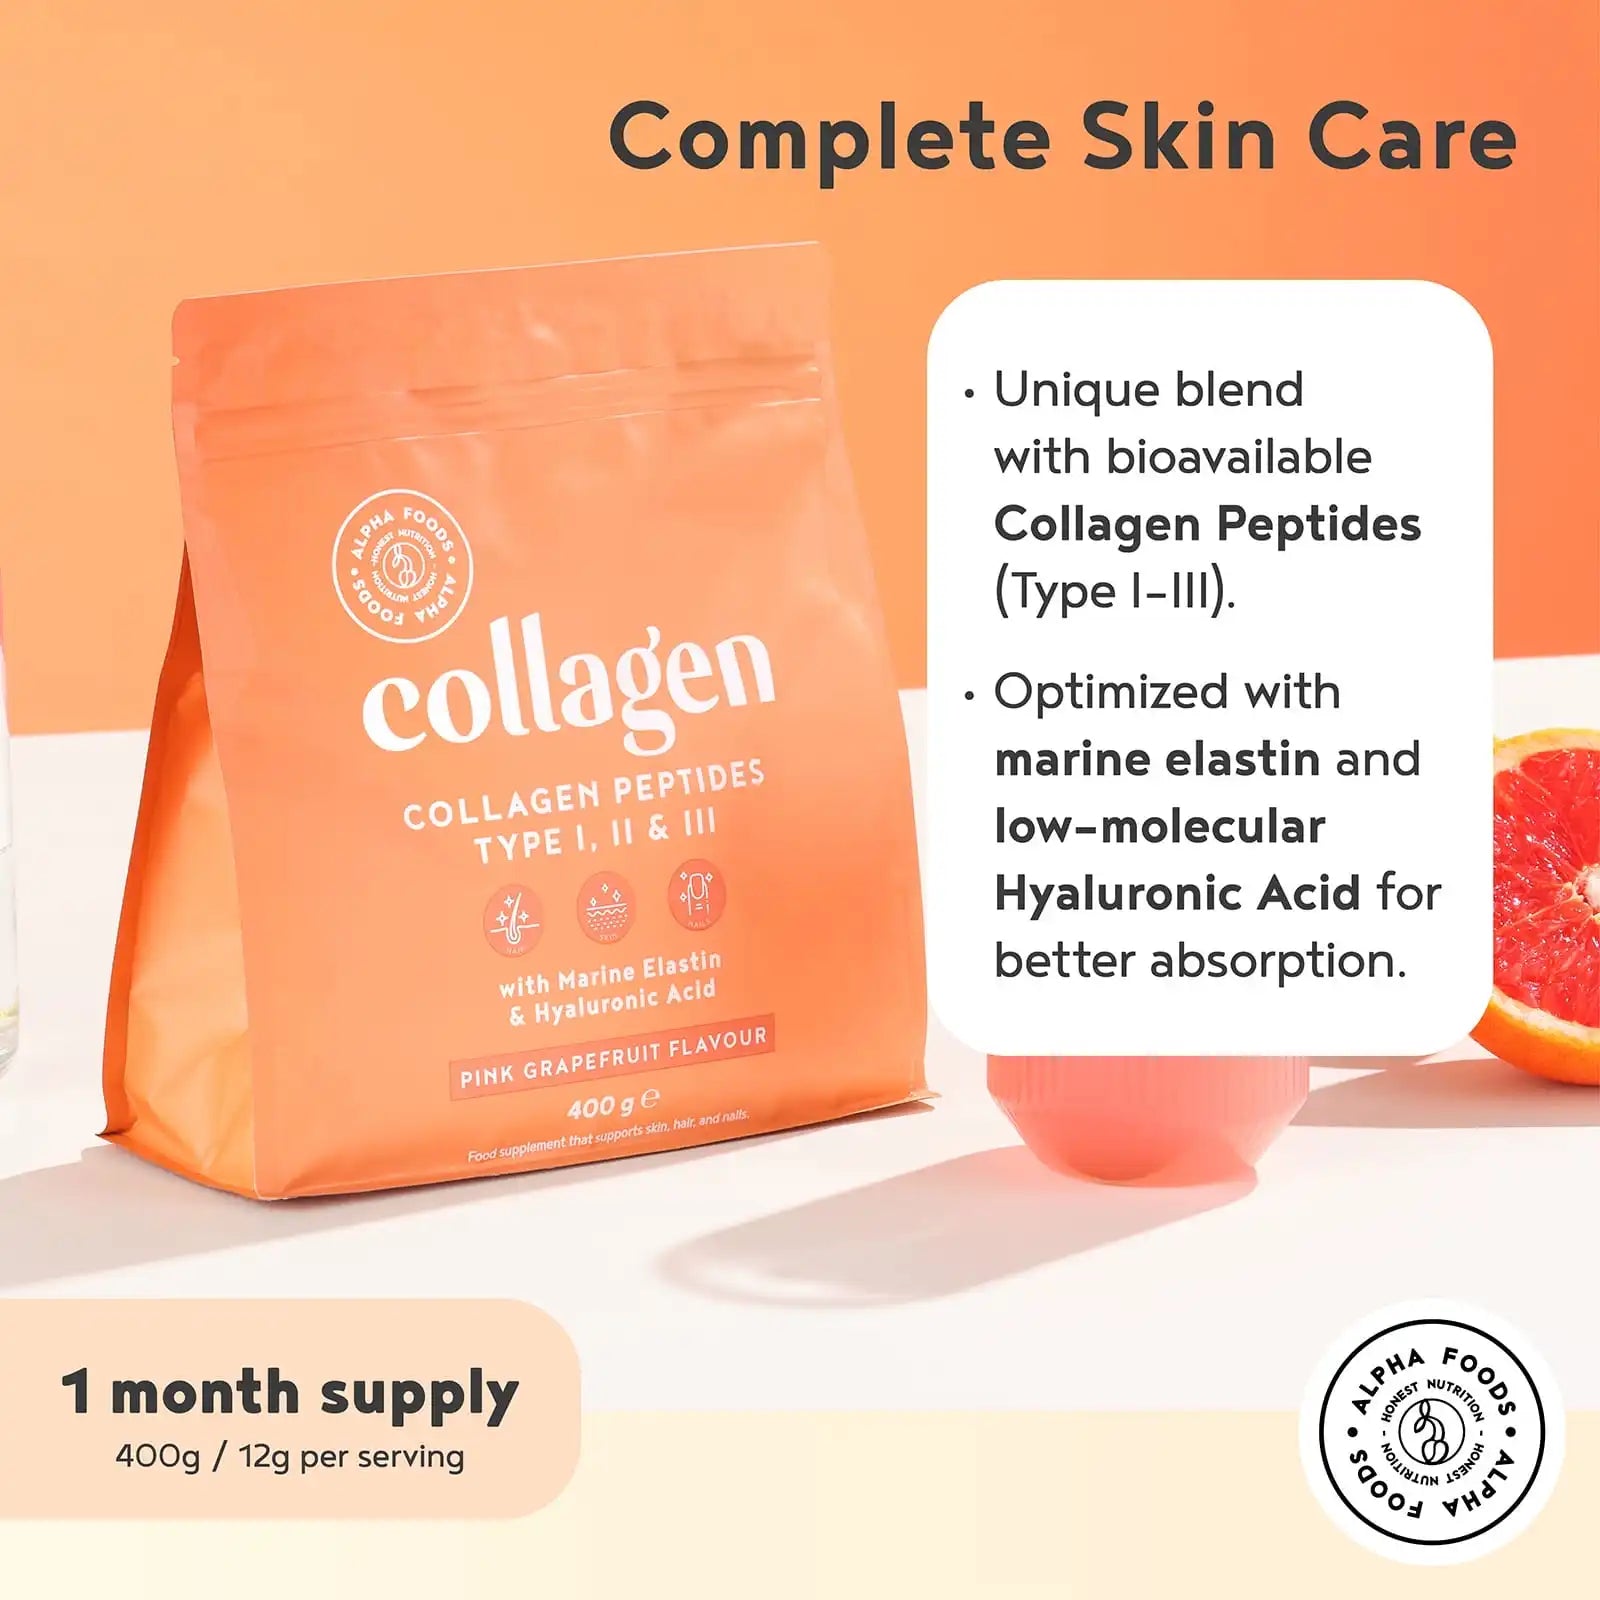 A+ One - Collagen with Marine Elastin & Hyaluronic Acid - Pink Grapefruit